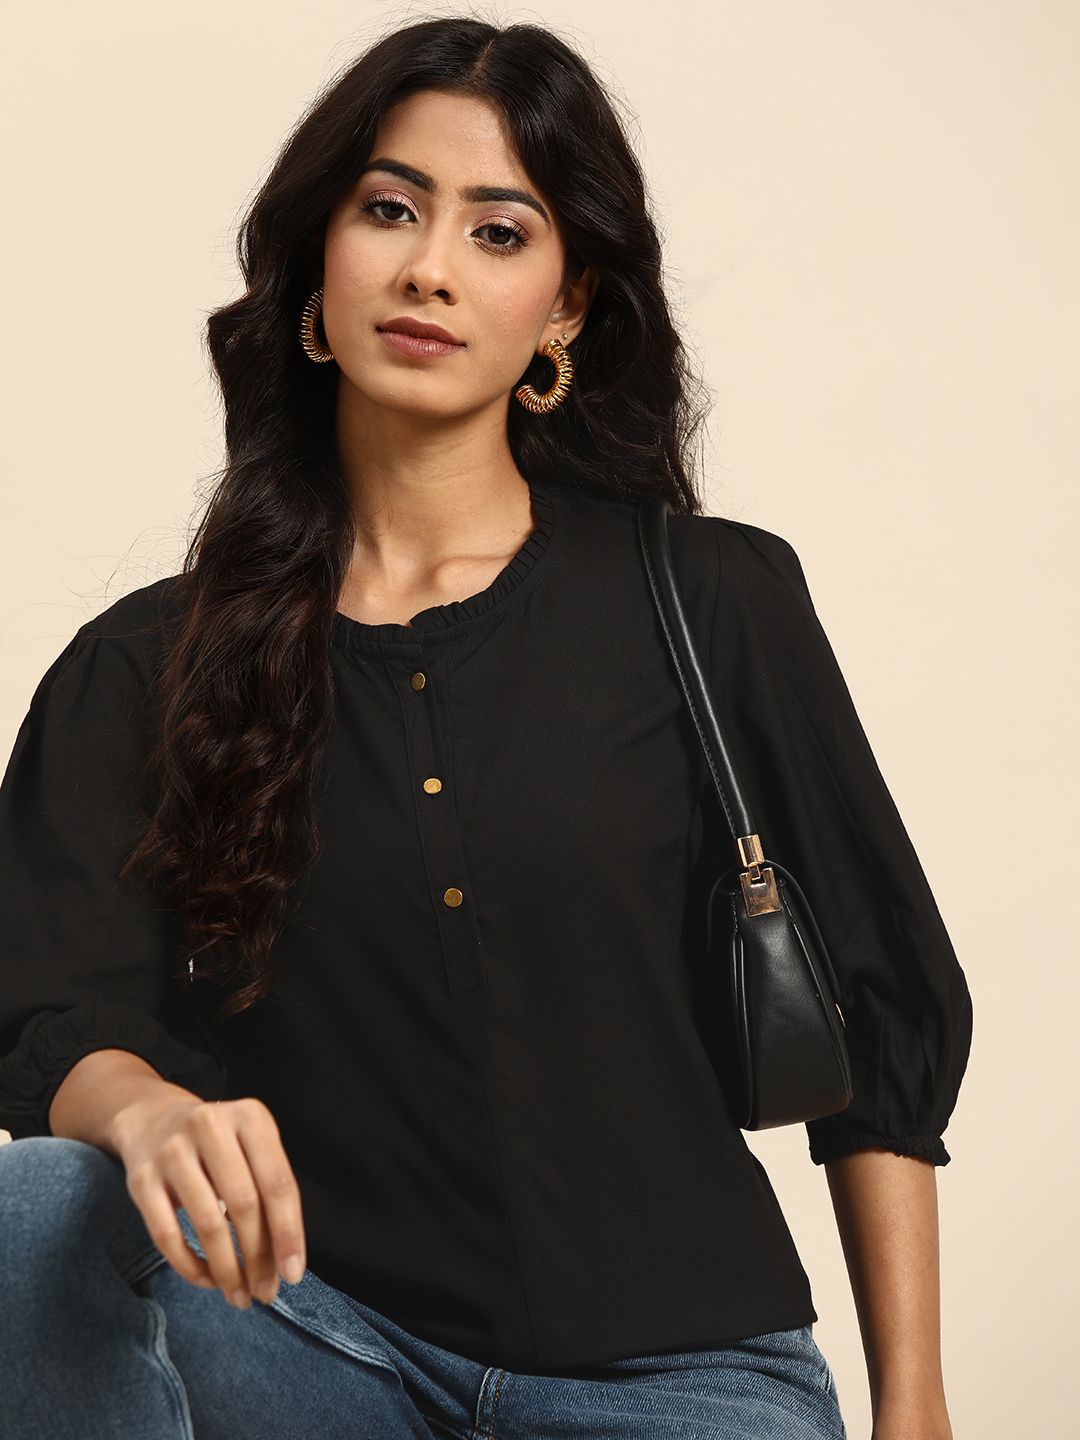 all about you Black Solid Top Price in India